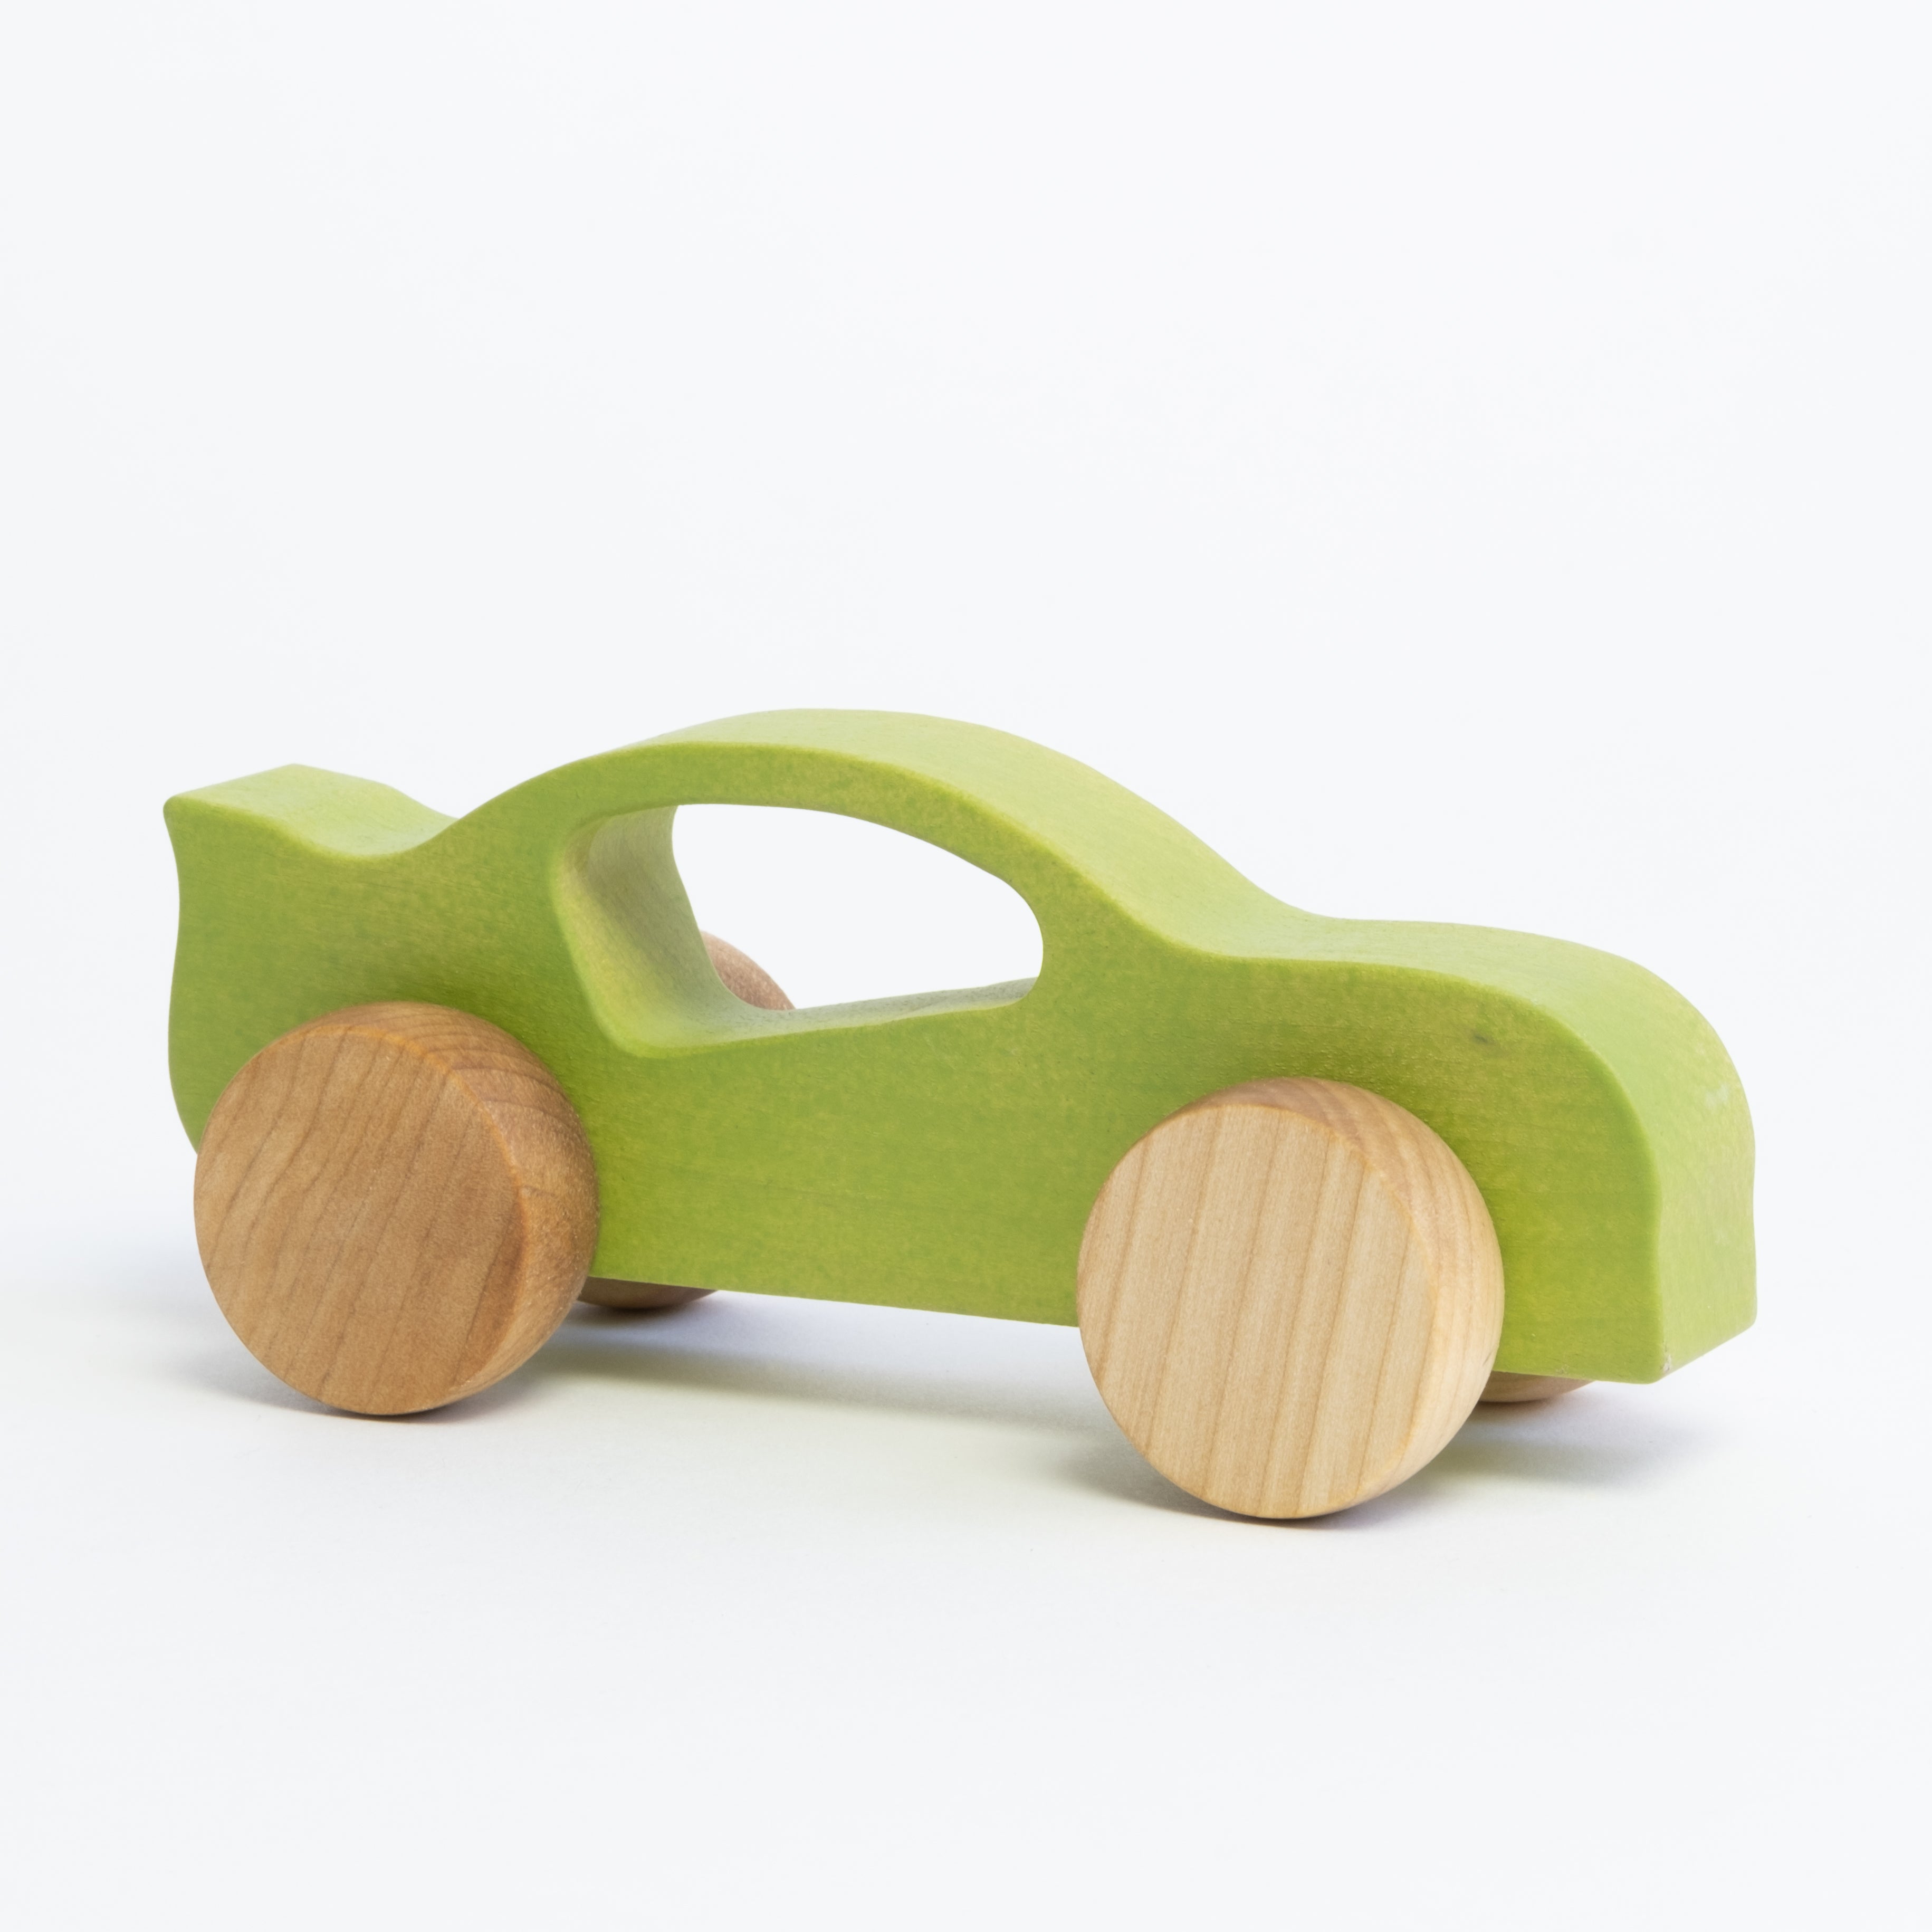 Crocolo Small wooden cars made in Quebec